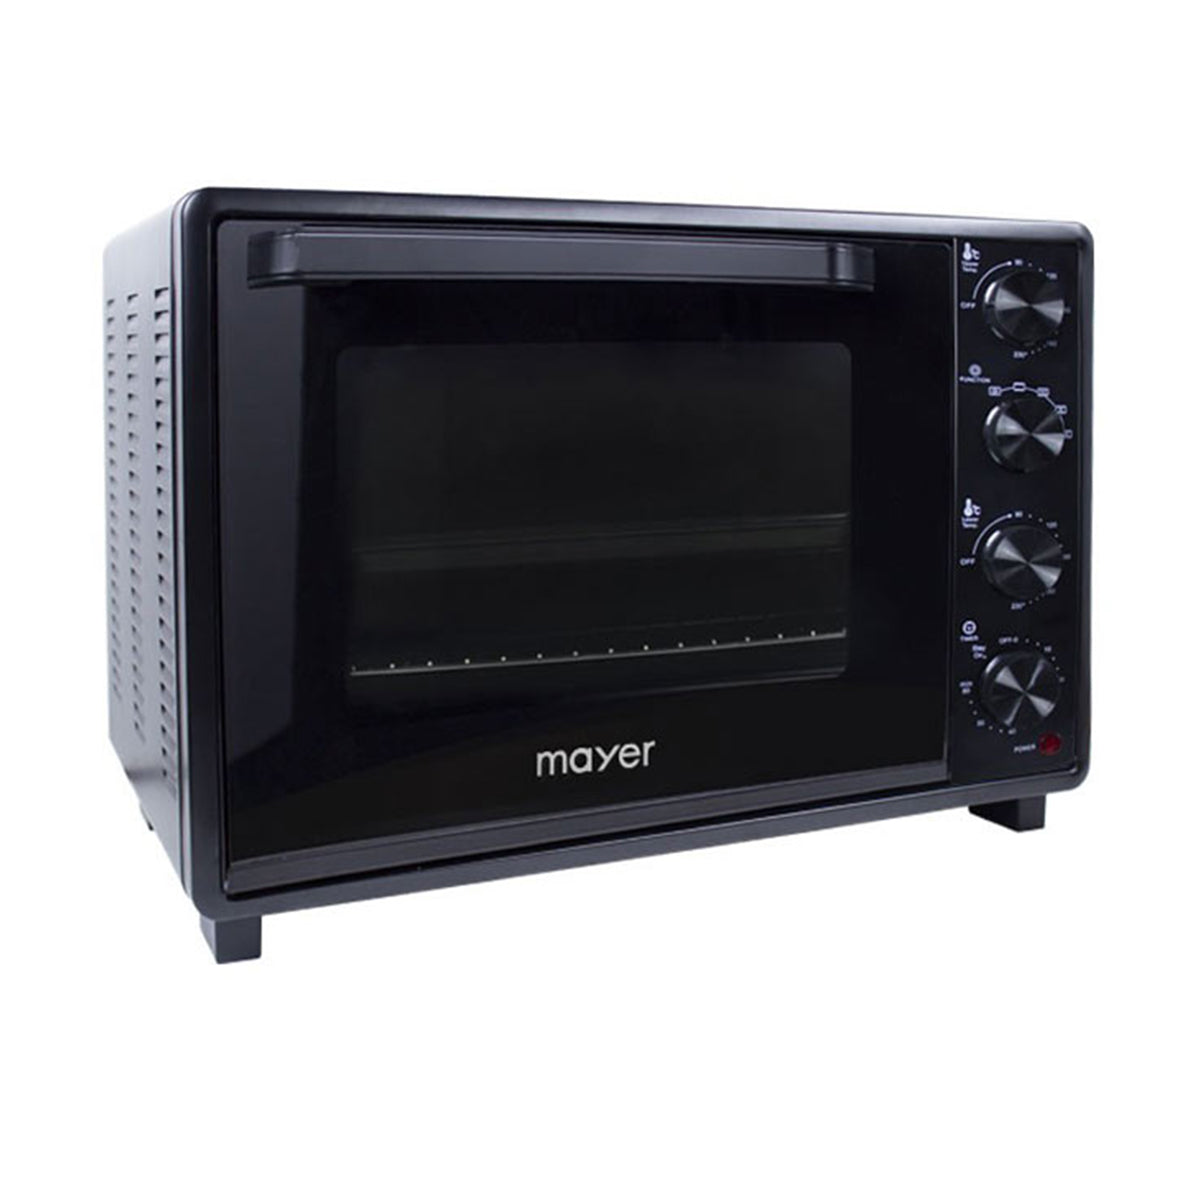 Mayer Electric Oven 33L